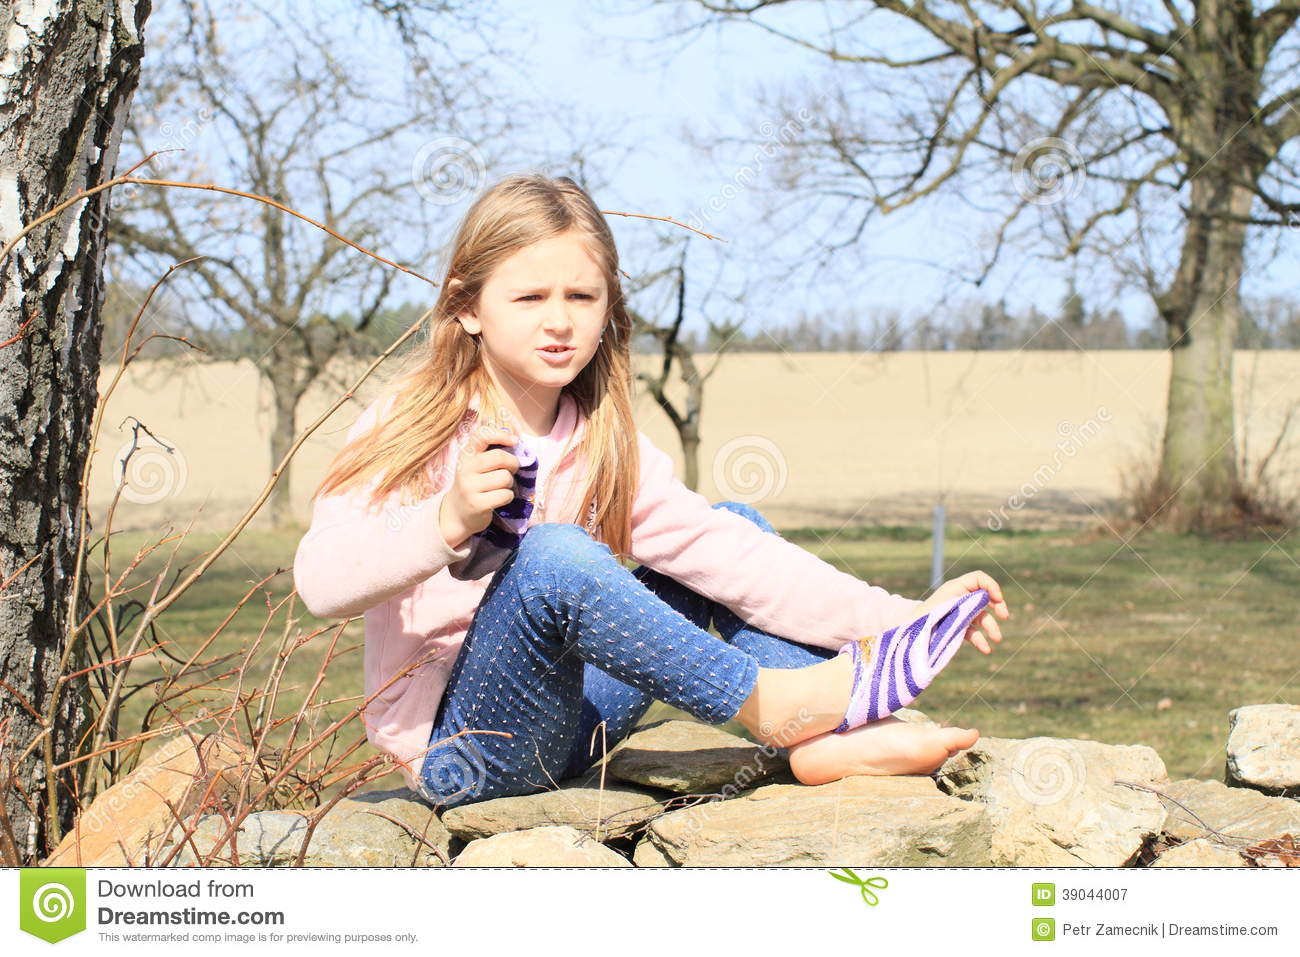 Pink Jacket Blue Pants Taking Off Socks While Sitting On Stone Wall